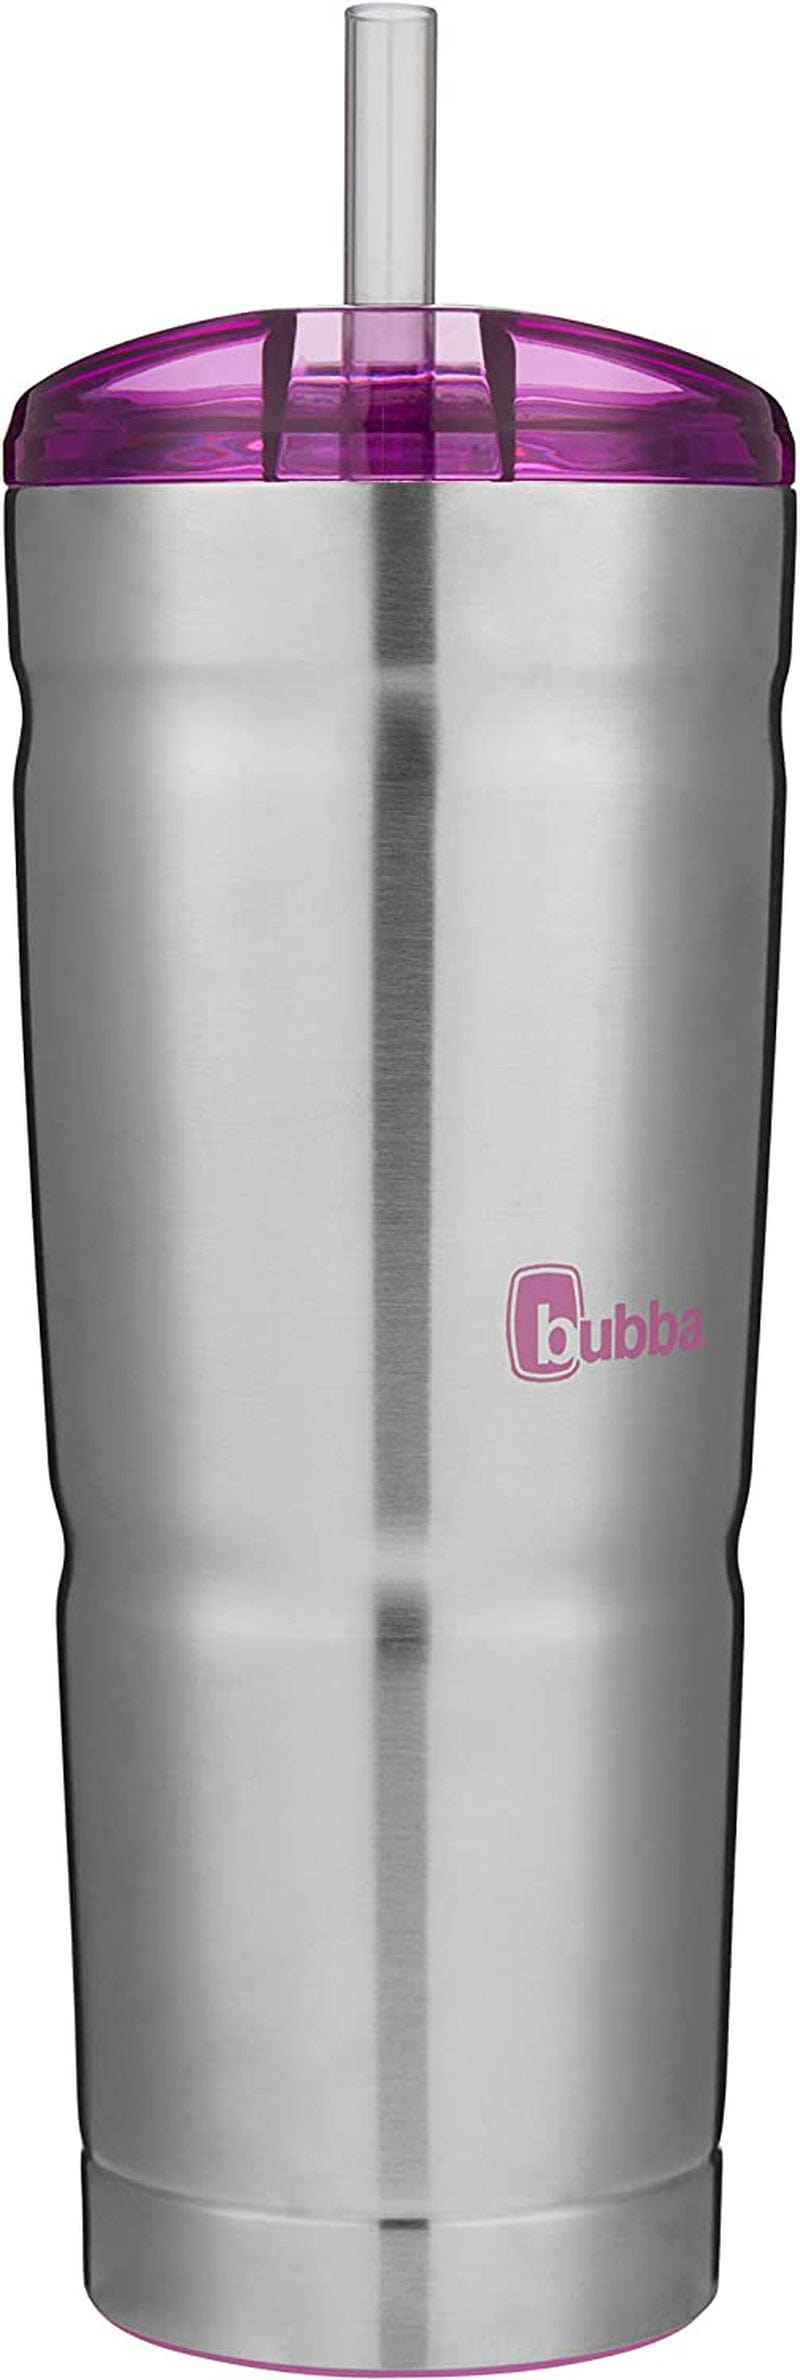 Bubba Straw Envy Vacuum-Insulated Stainless Steel Tumbler, 24 Oz., Island Teal Lid Home & Garden > Kitchen & Dining > Tableware > Drinkware BUBBA BRANDS Steel/Paradise Purple 24oz 